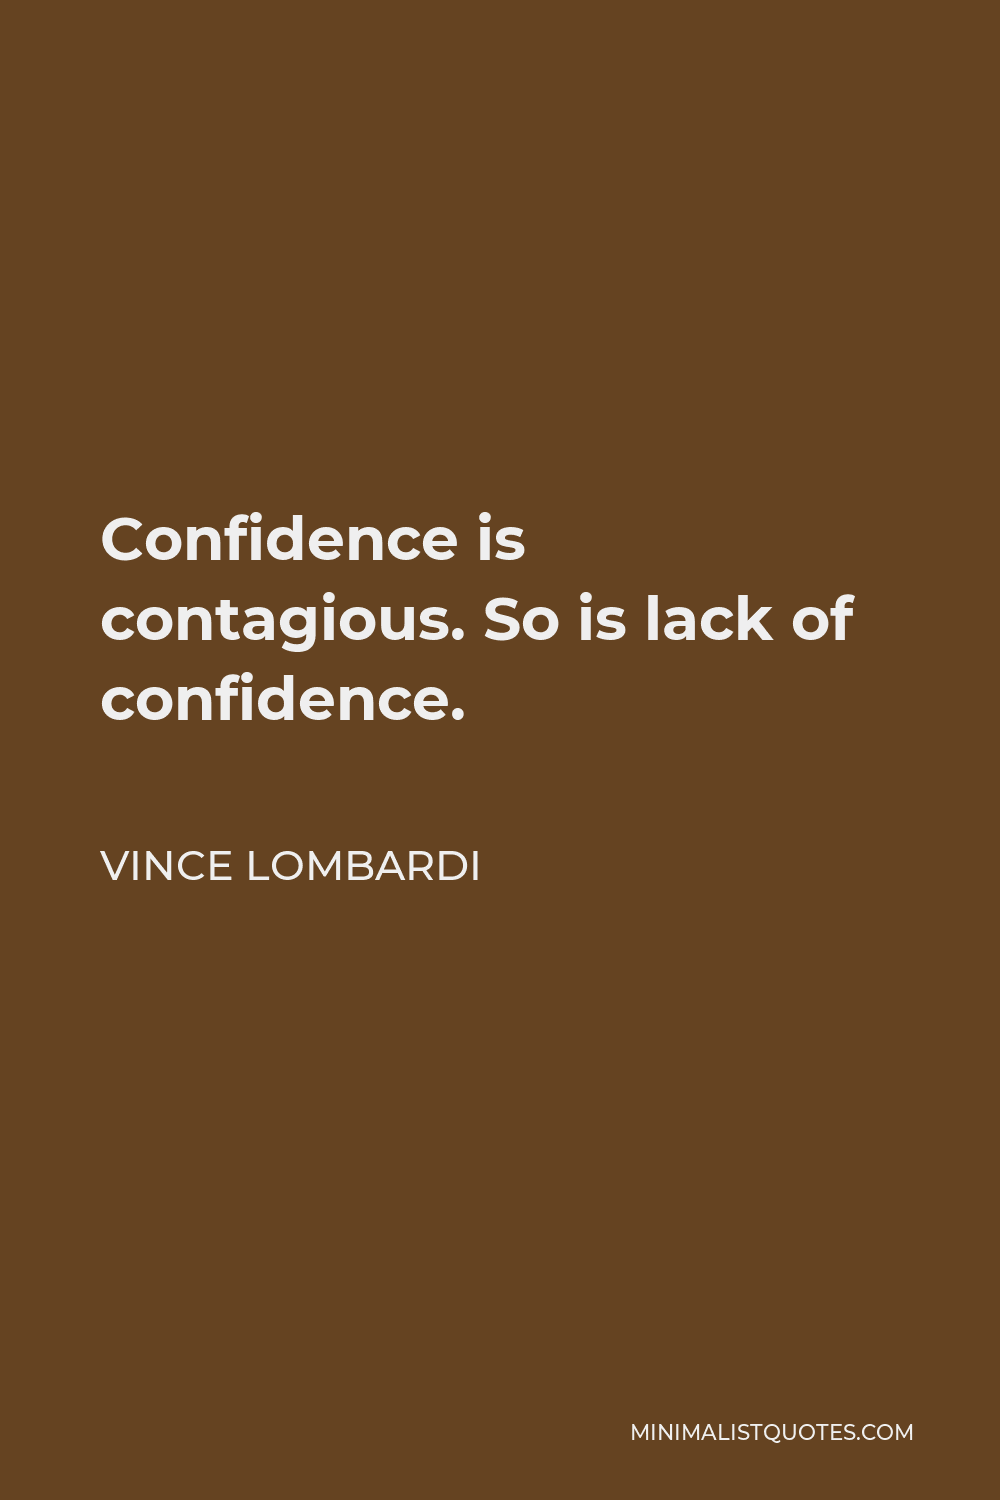 Vince Lombardi Quote - Confidence is contagious. So is lack of confidence.